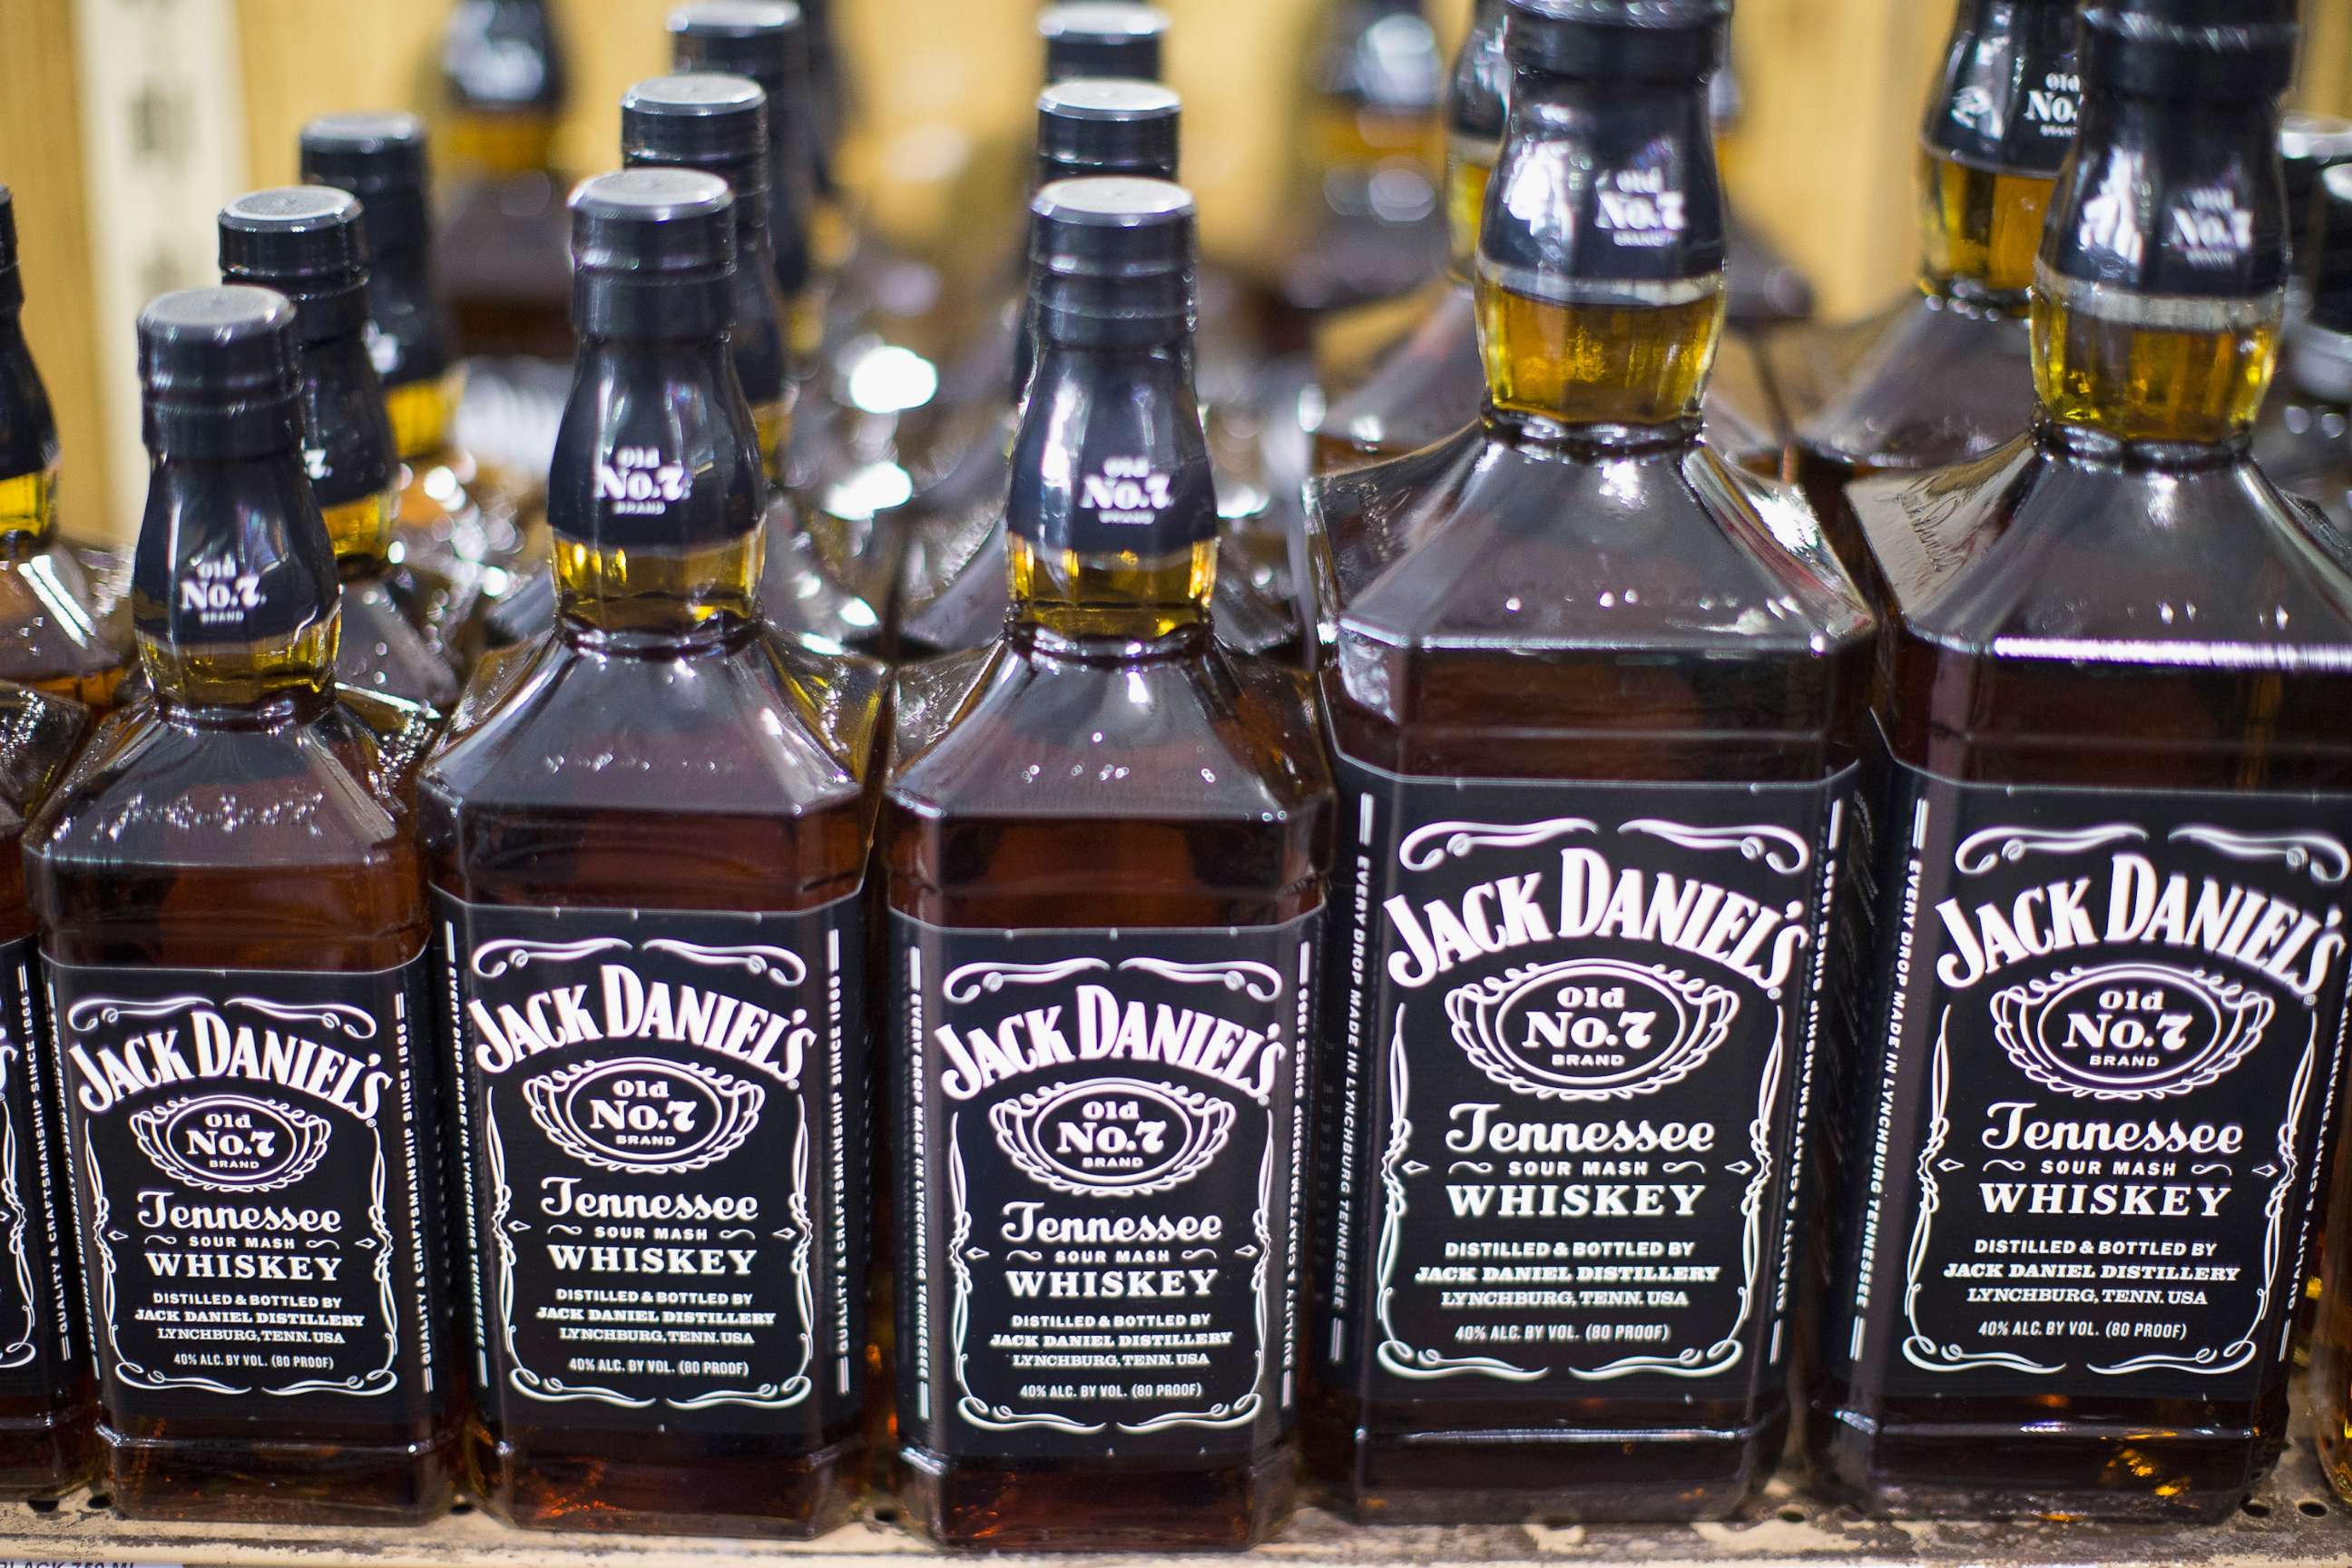 PHOTO: Jack Daniels Tennessee Whiskey is offered for sale at a liquor store on Feb. 3, 2015 in Chicago.